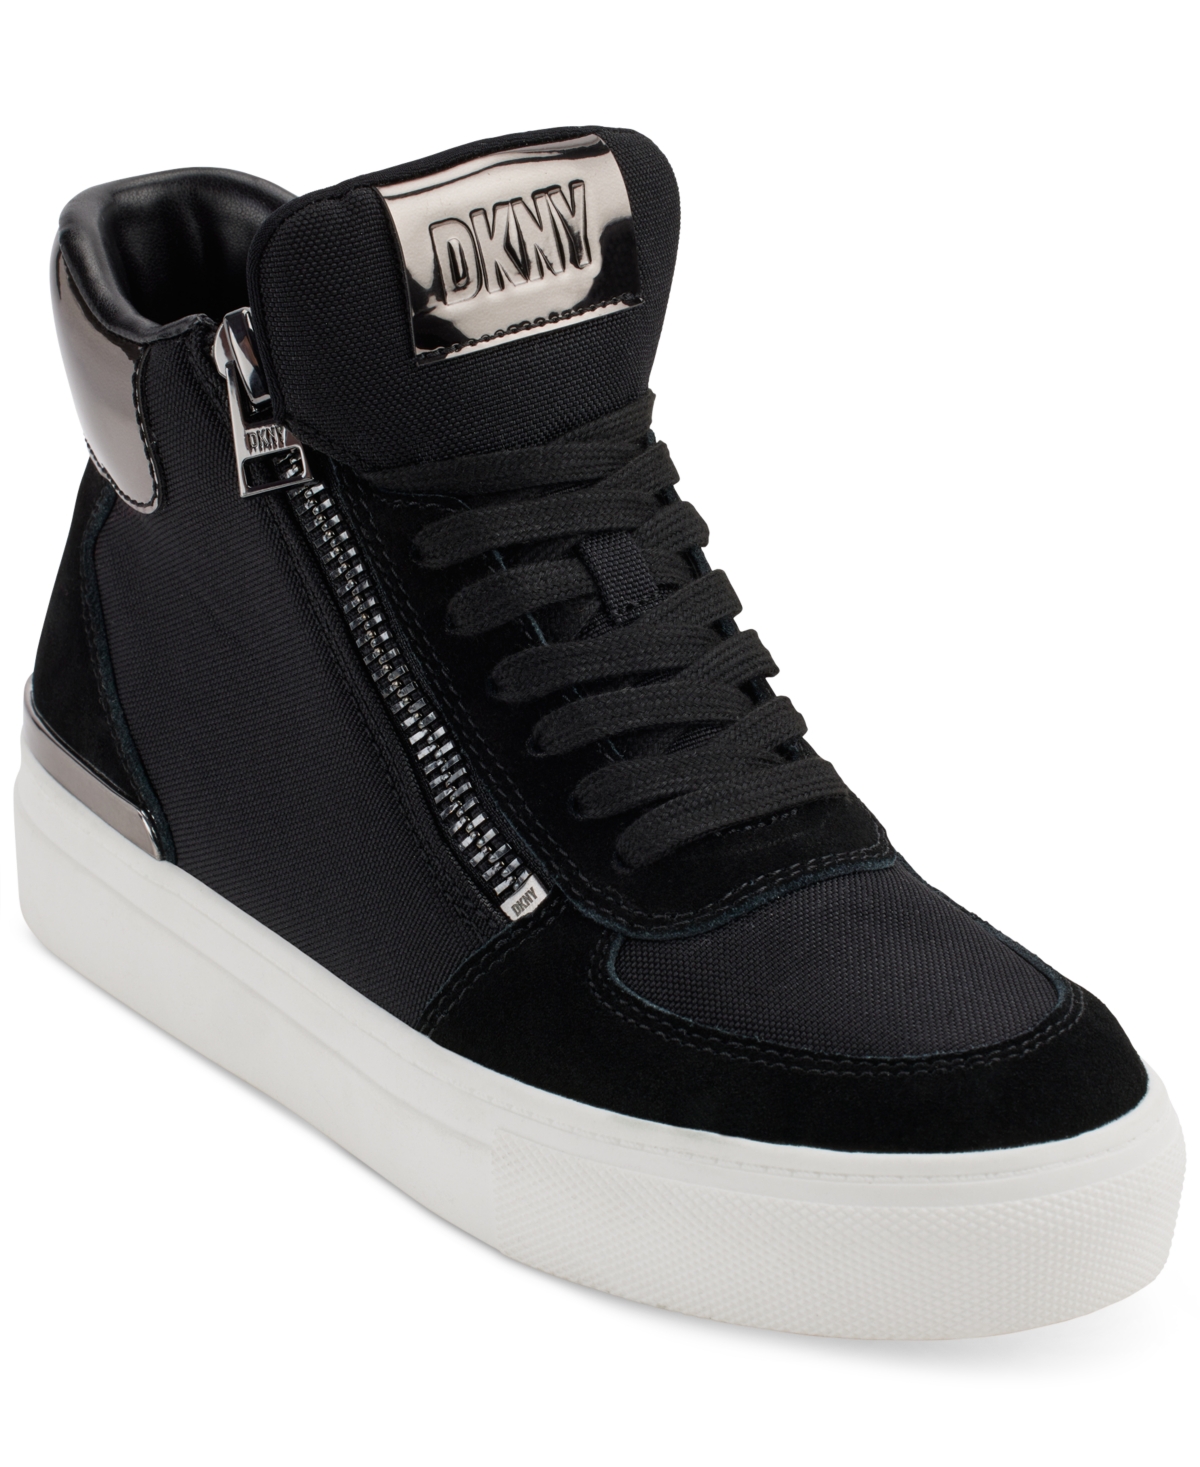 Women's Cindell Lace-Up Zipper High Top Sneakers - Pebble/ Black